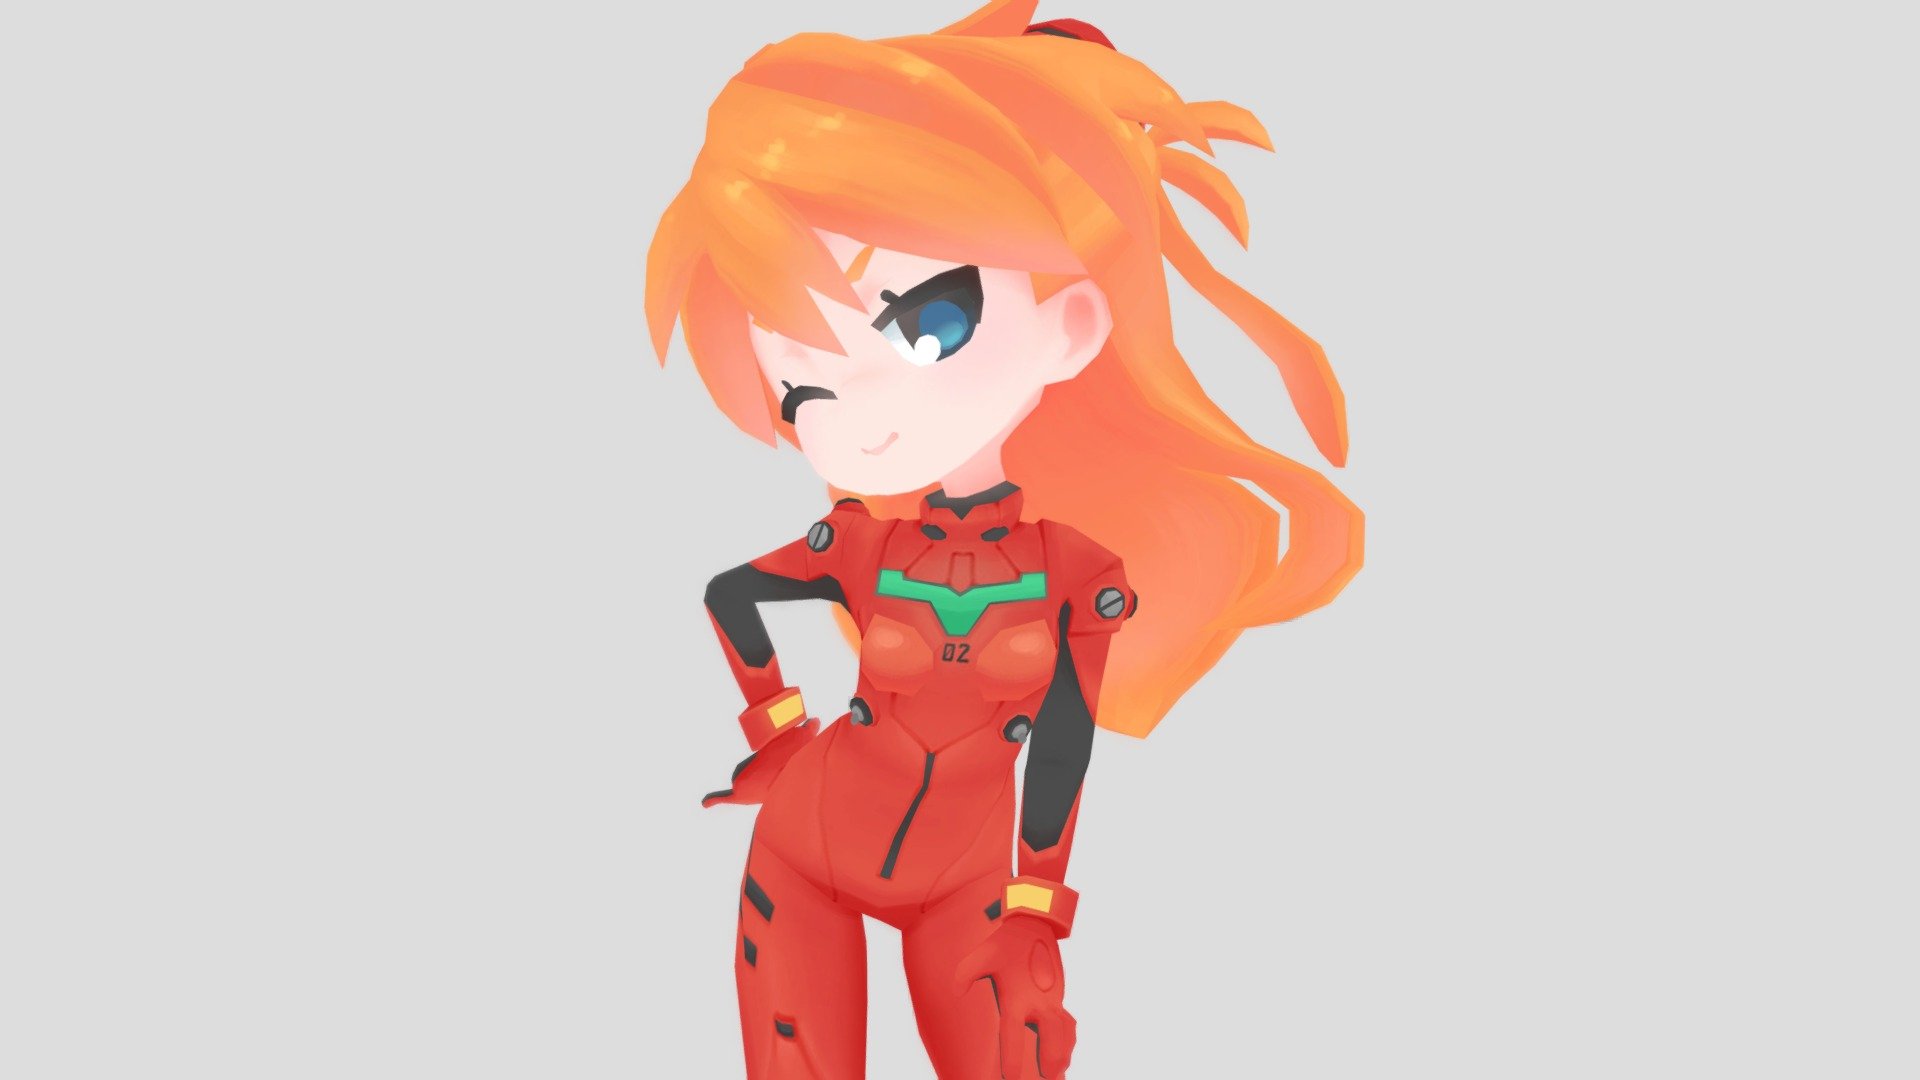 Model of Asuka Langley the anime Neon Genesis Evangelion! Posed as she is in her official artwork – spunky and tsundere.

I wanted to do a chibi model of Asuka after working on the Mass Produced Evangelion character (also visible on my page!), and in the end I think she came out really cute! I like modeling cute things truthfully as well as figurative characters, so this project was definitely a lot of fun. It was once again a big learning experience though, as I really tried to work on things like facial topology, that anime-feeling style, and being painterly with my textures. I still have a long way to go of course, but this felt like a big milestone that I'm happy to have done!

Thank you so much for viewing! - Chibi Asuka Langley - 3D model by julliannedlc 3d model